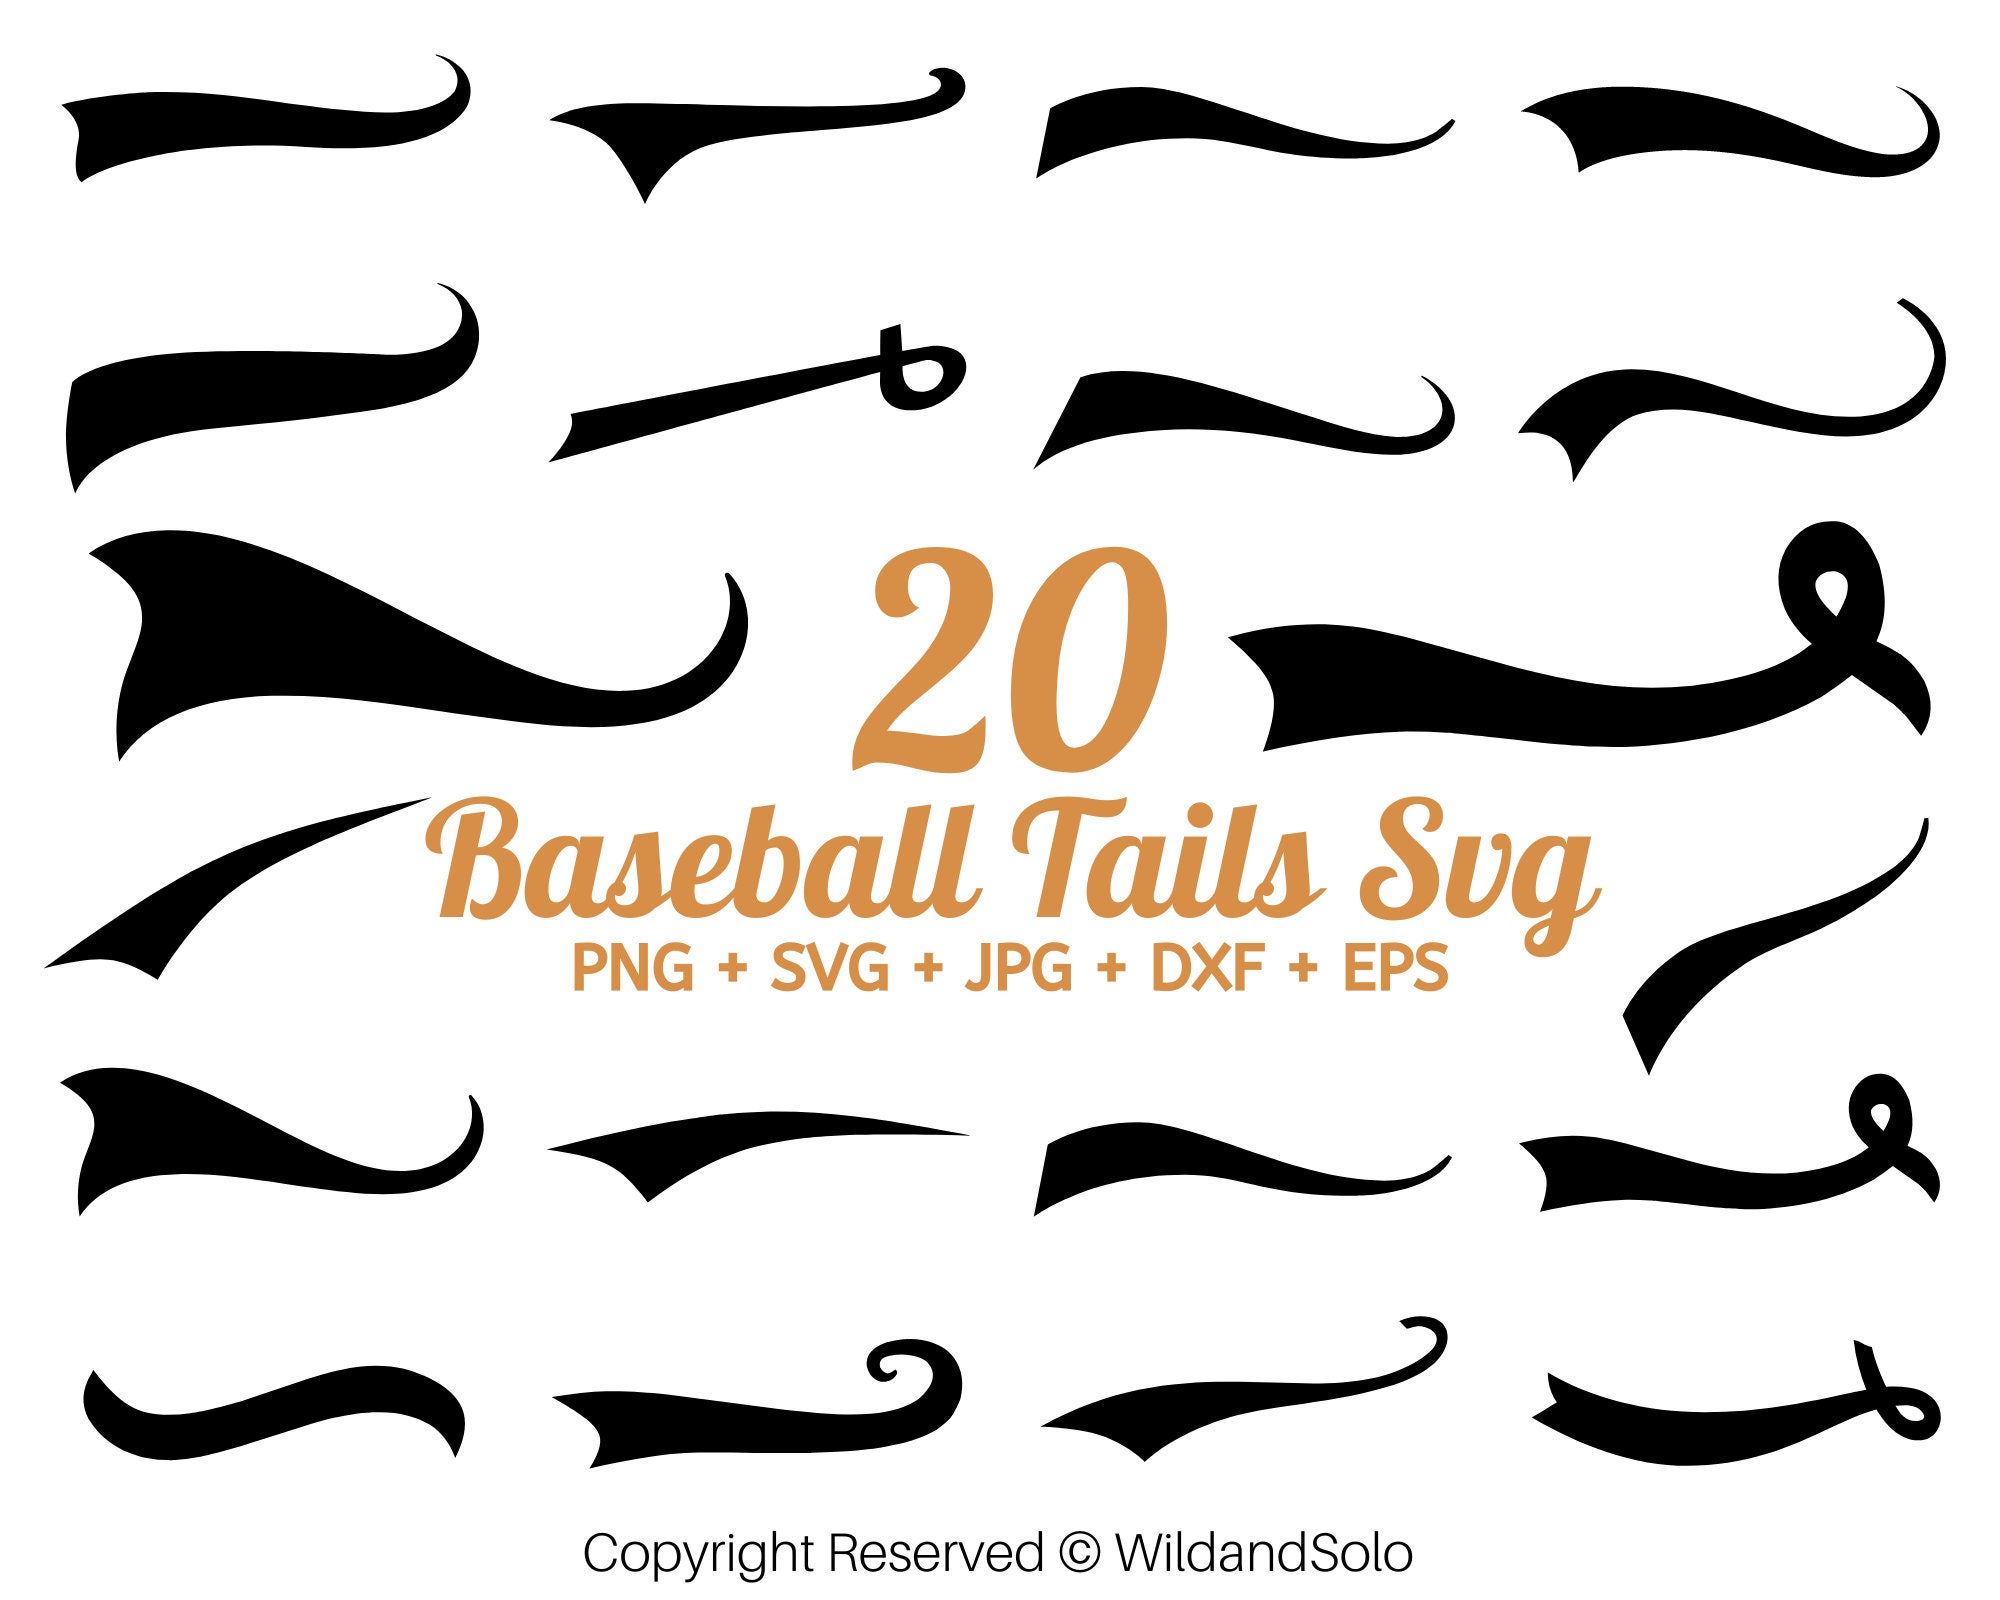 Premium Vector  Swoosh tails retro swooshes typography curly font tail  sport vintage text decoration lettering banners underline accent tidy vector  collection